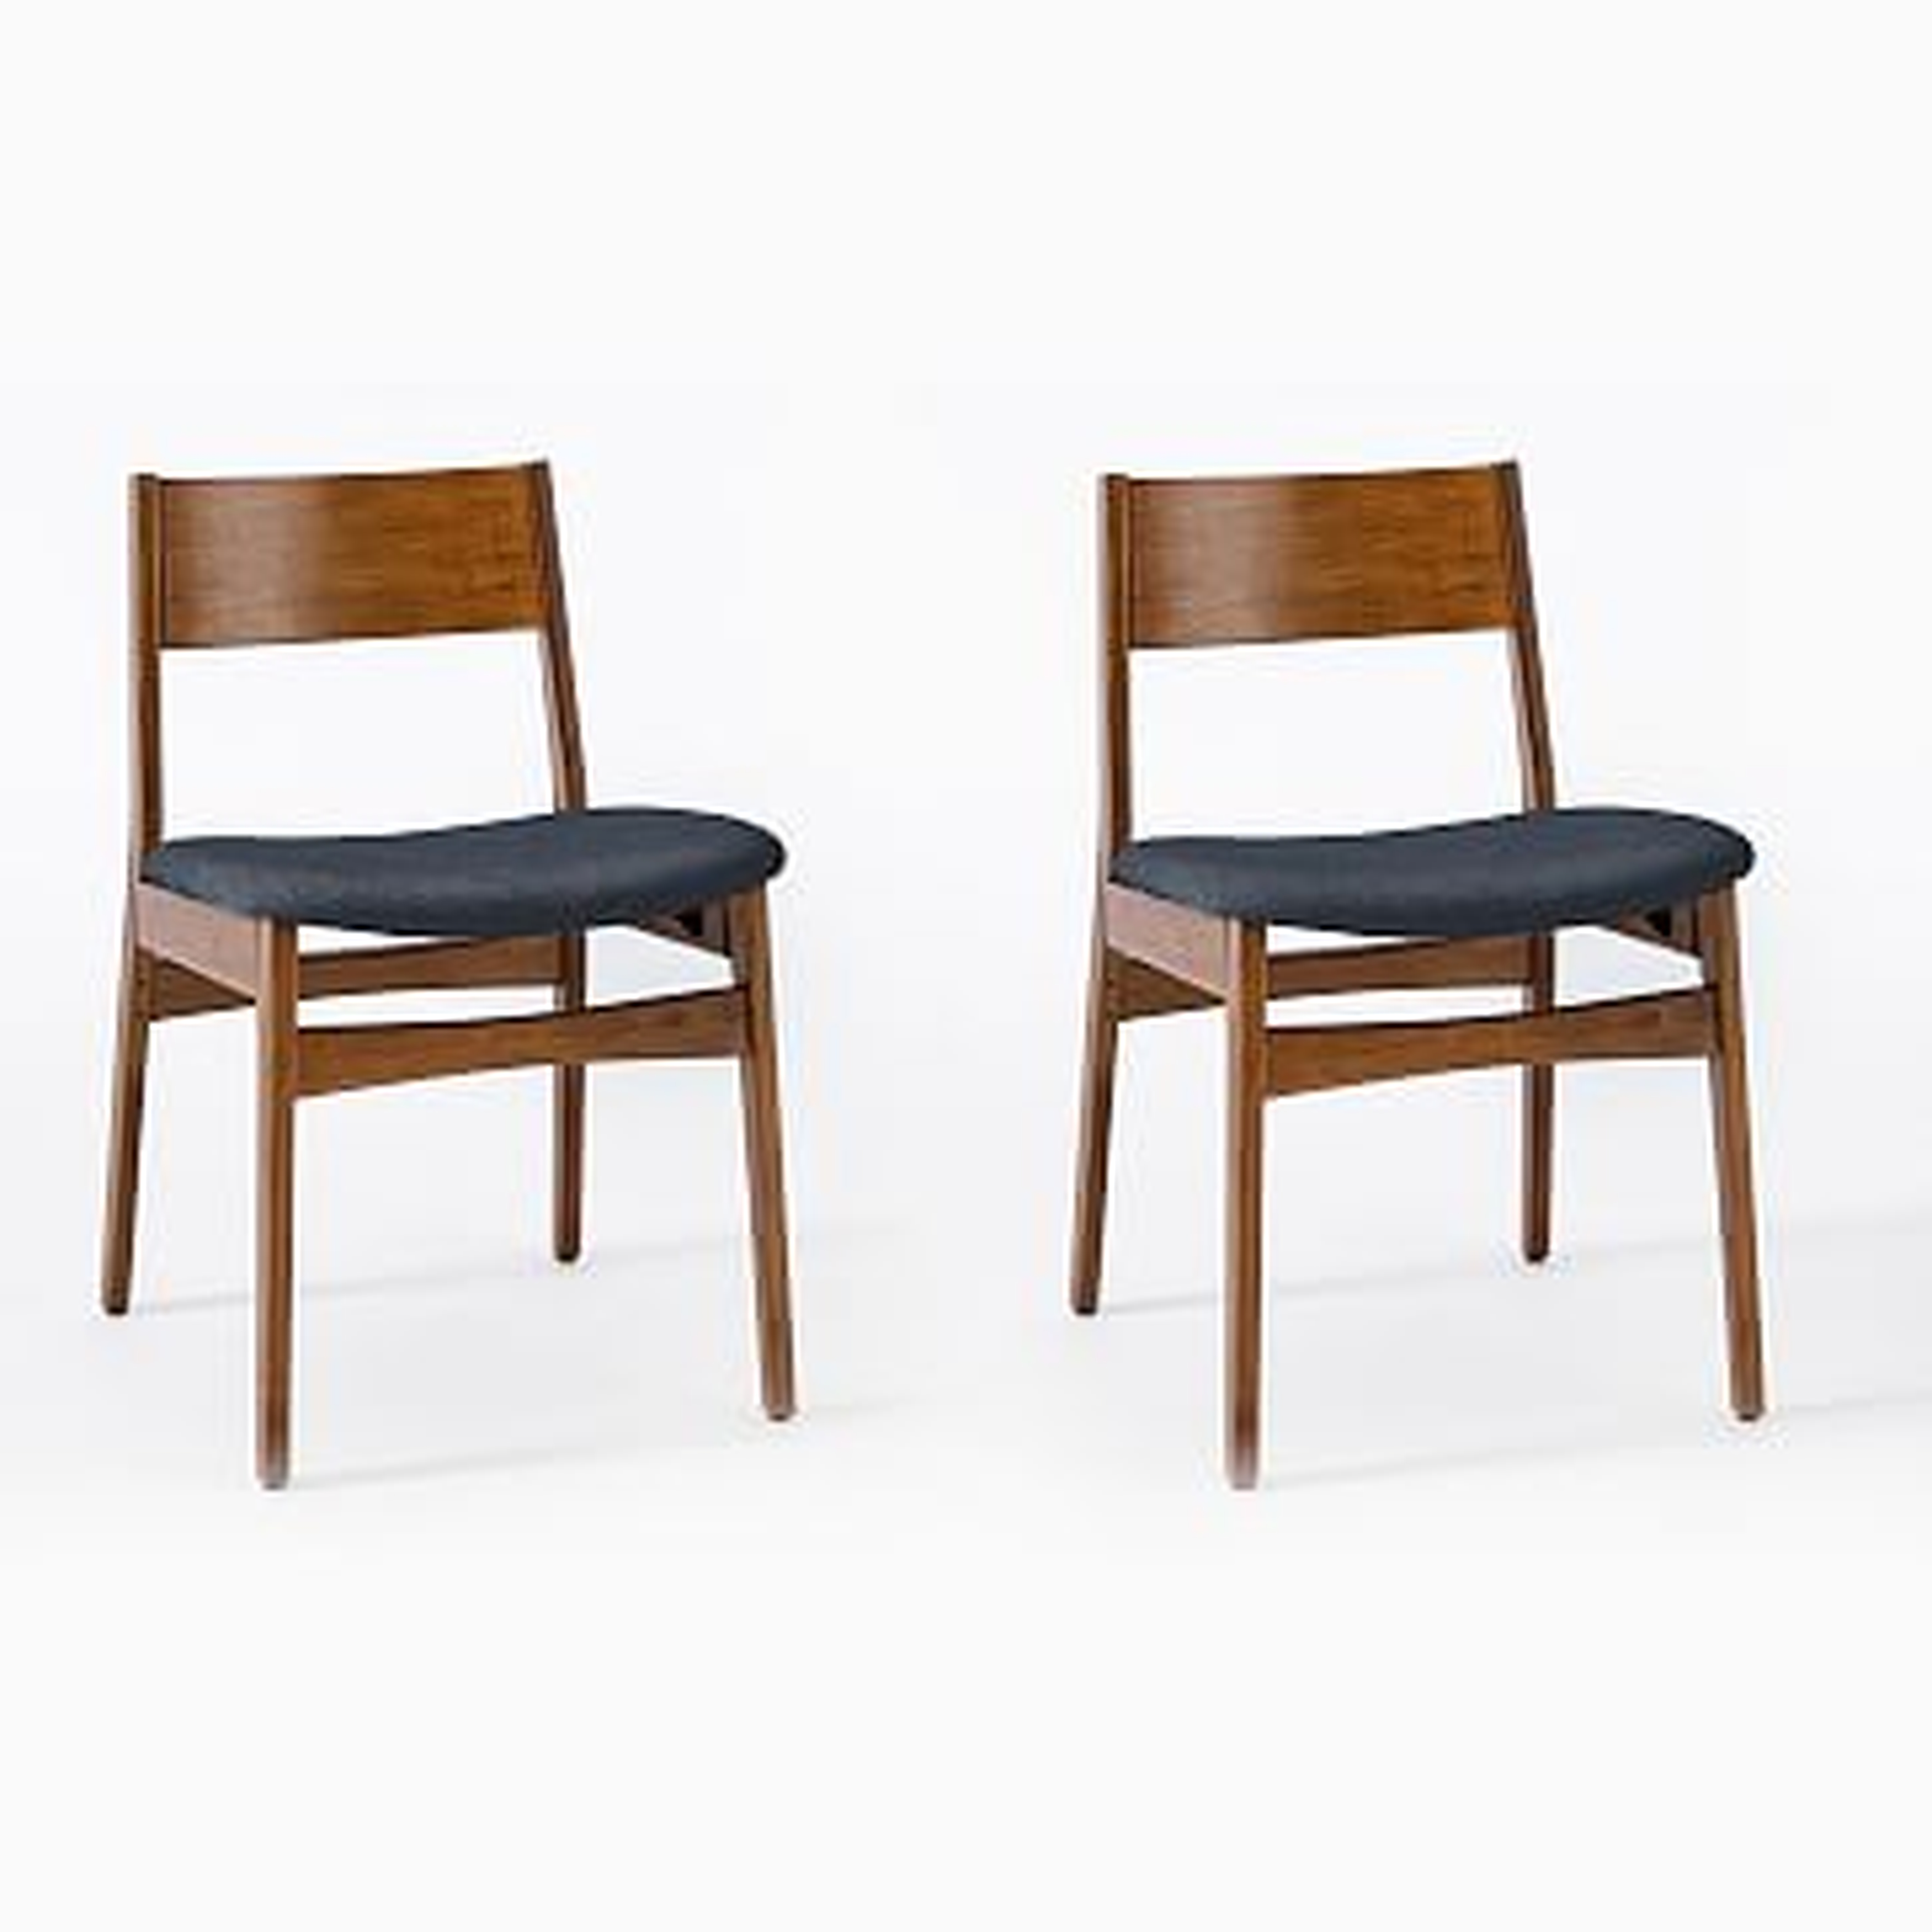 Baltimore Dining Chair (Set of 2) - West Elm